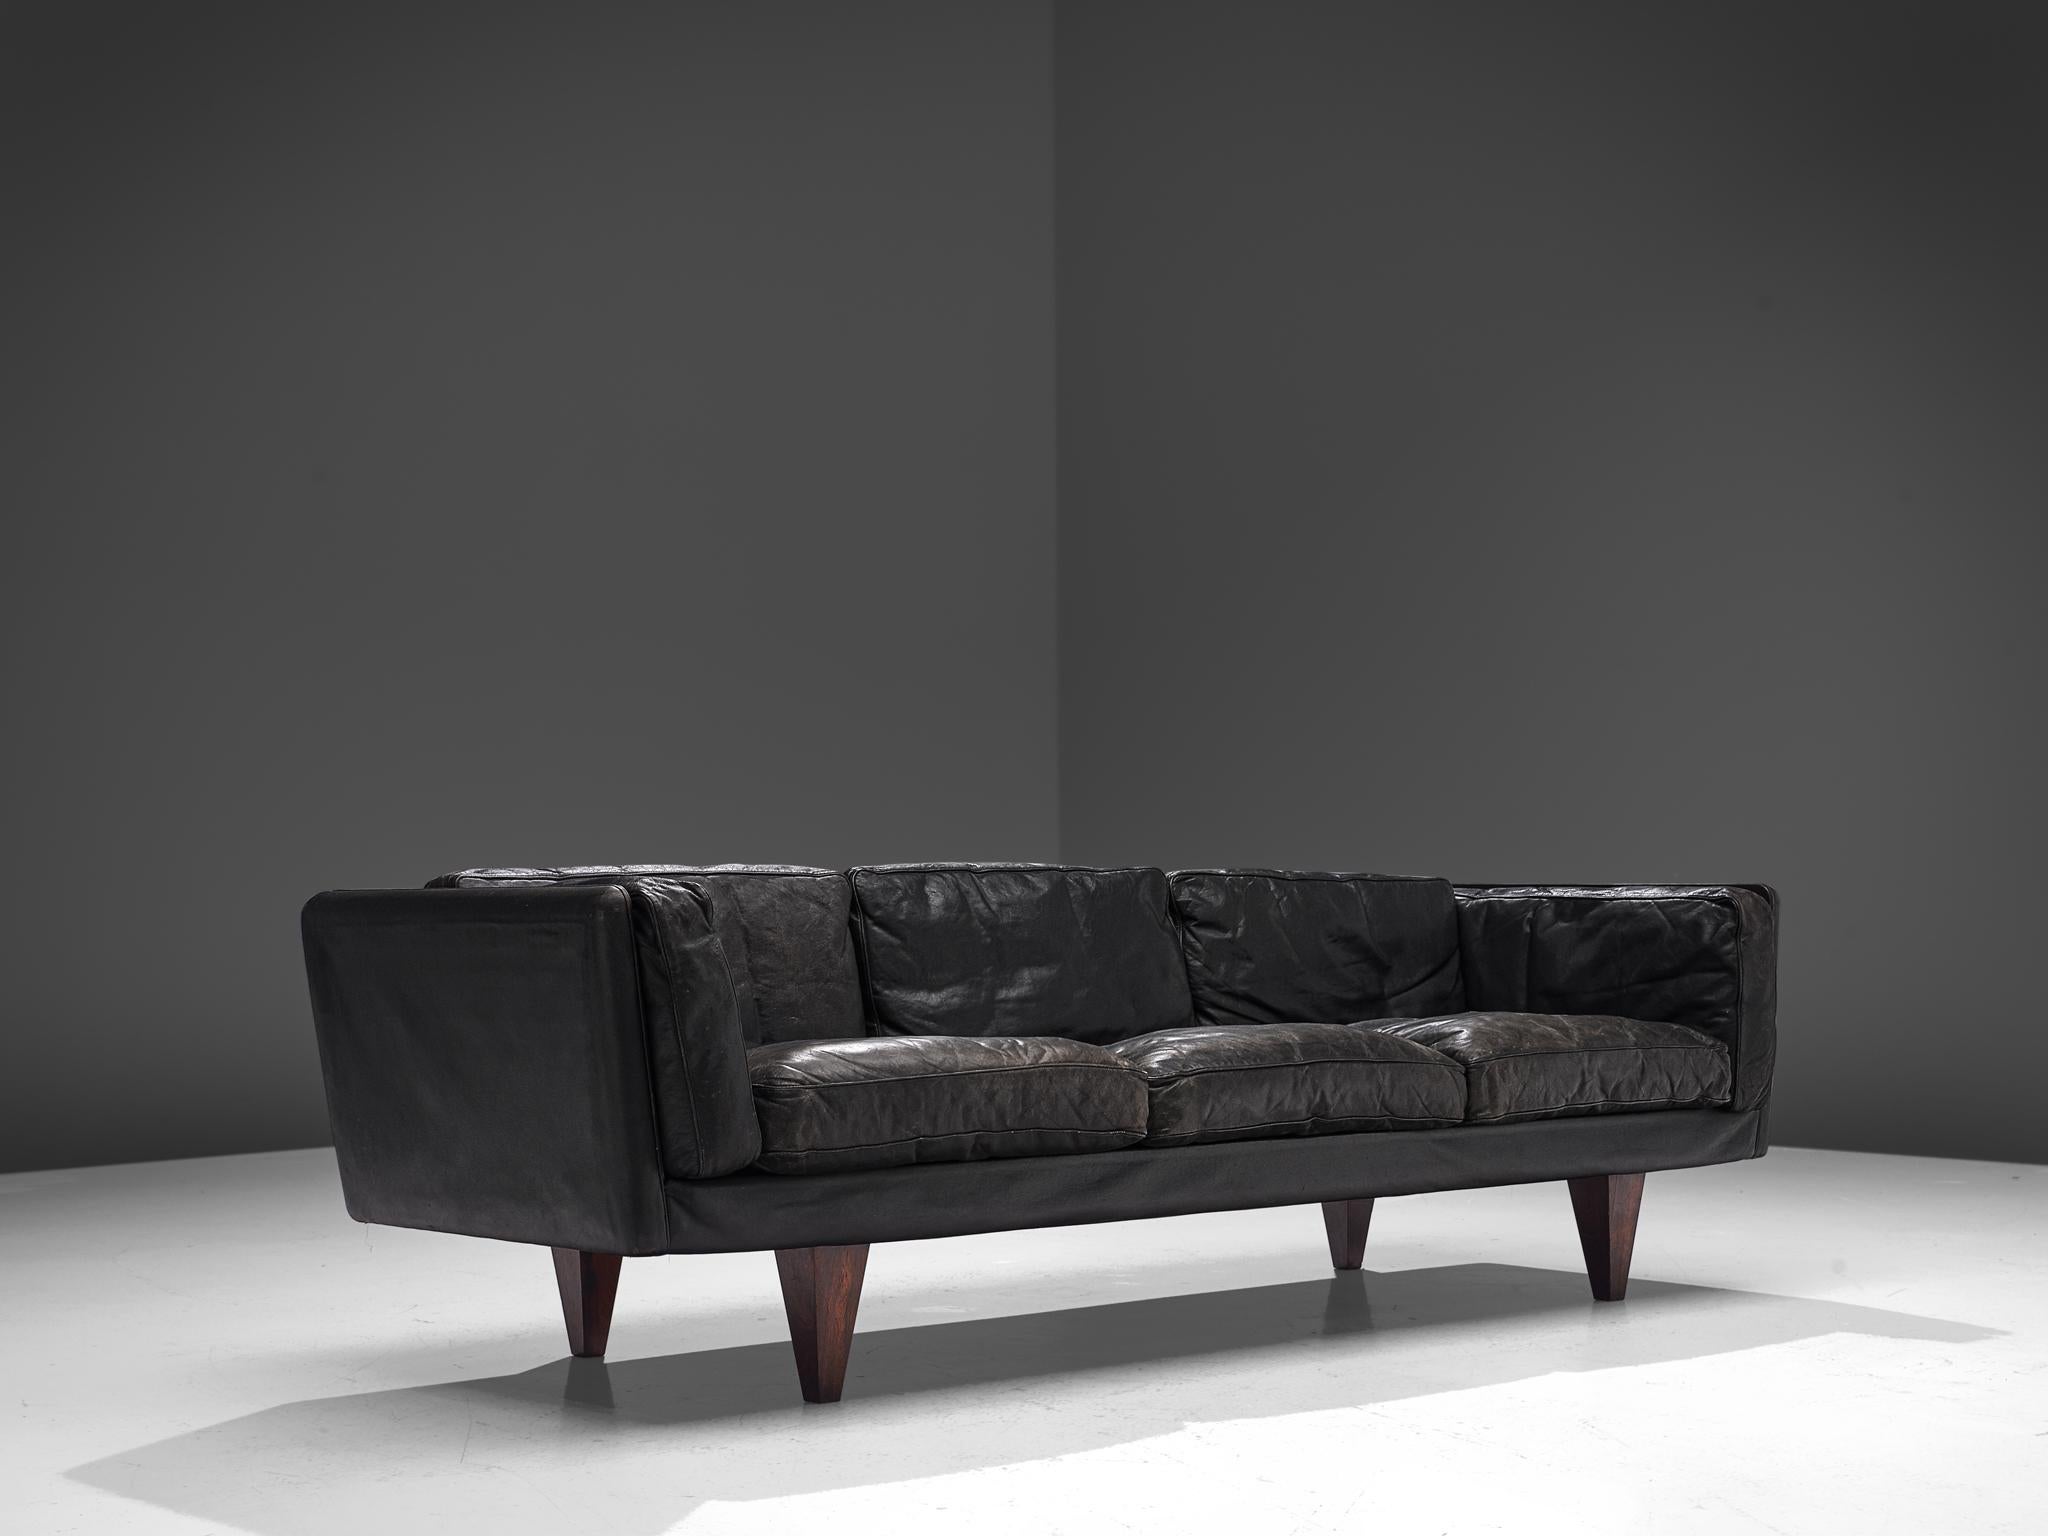 Illum Wikkelsø, sofa model 'V11' in leather and rosewood, Denmark, 1960s.

Stunningly three-seat sofa, designed by Danish designer Illum Wikkelsø. Highly comfortable and beautiful designed sofa with original leather upholstery. The deep black high